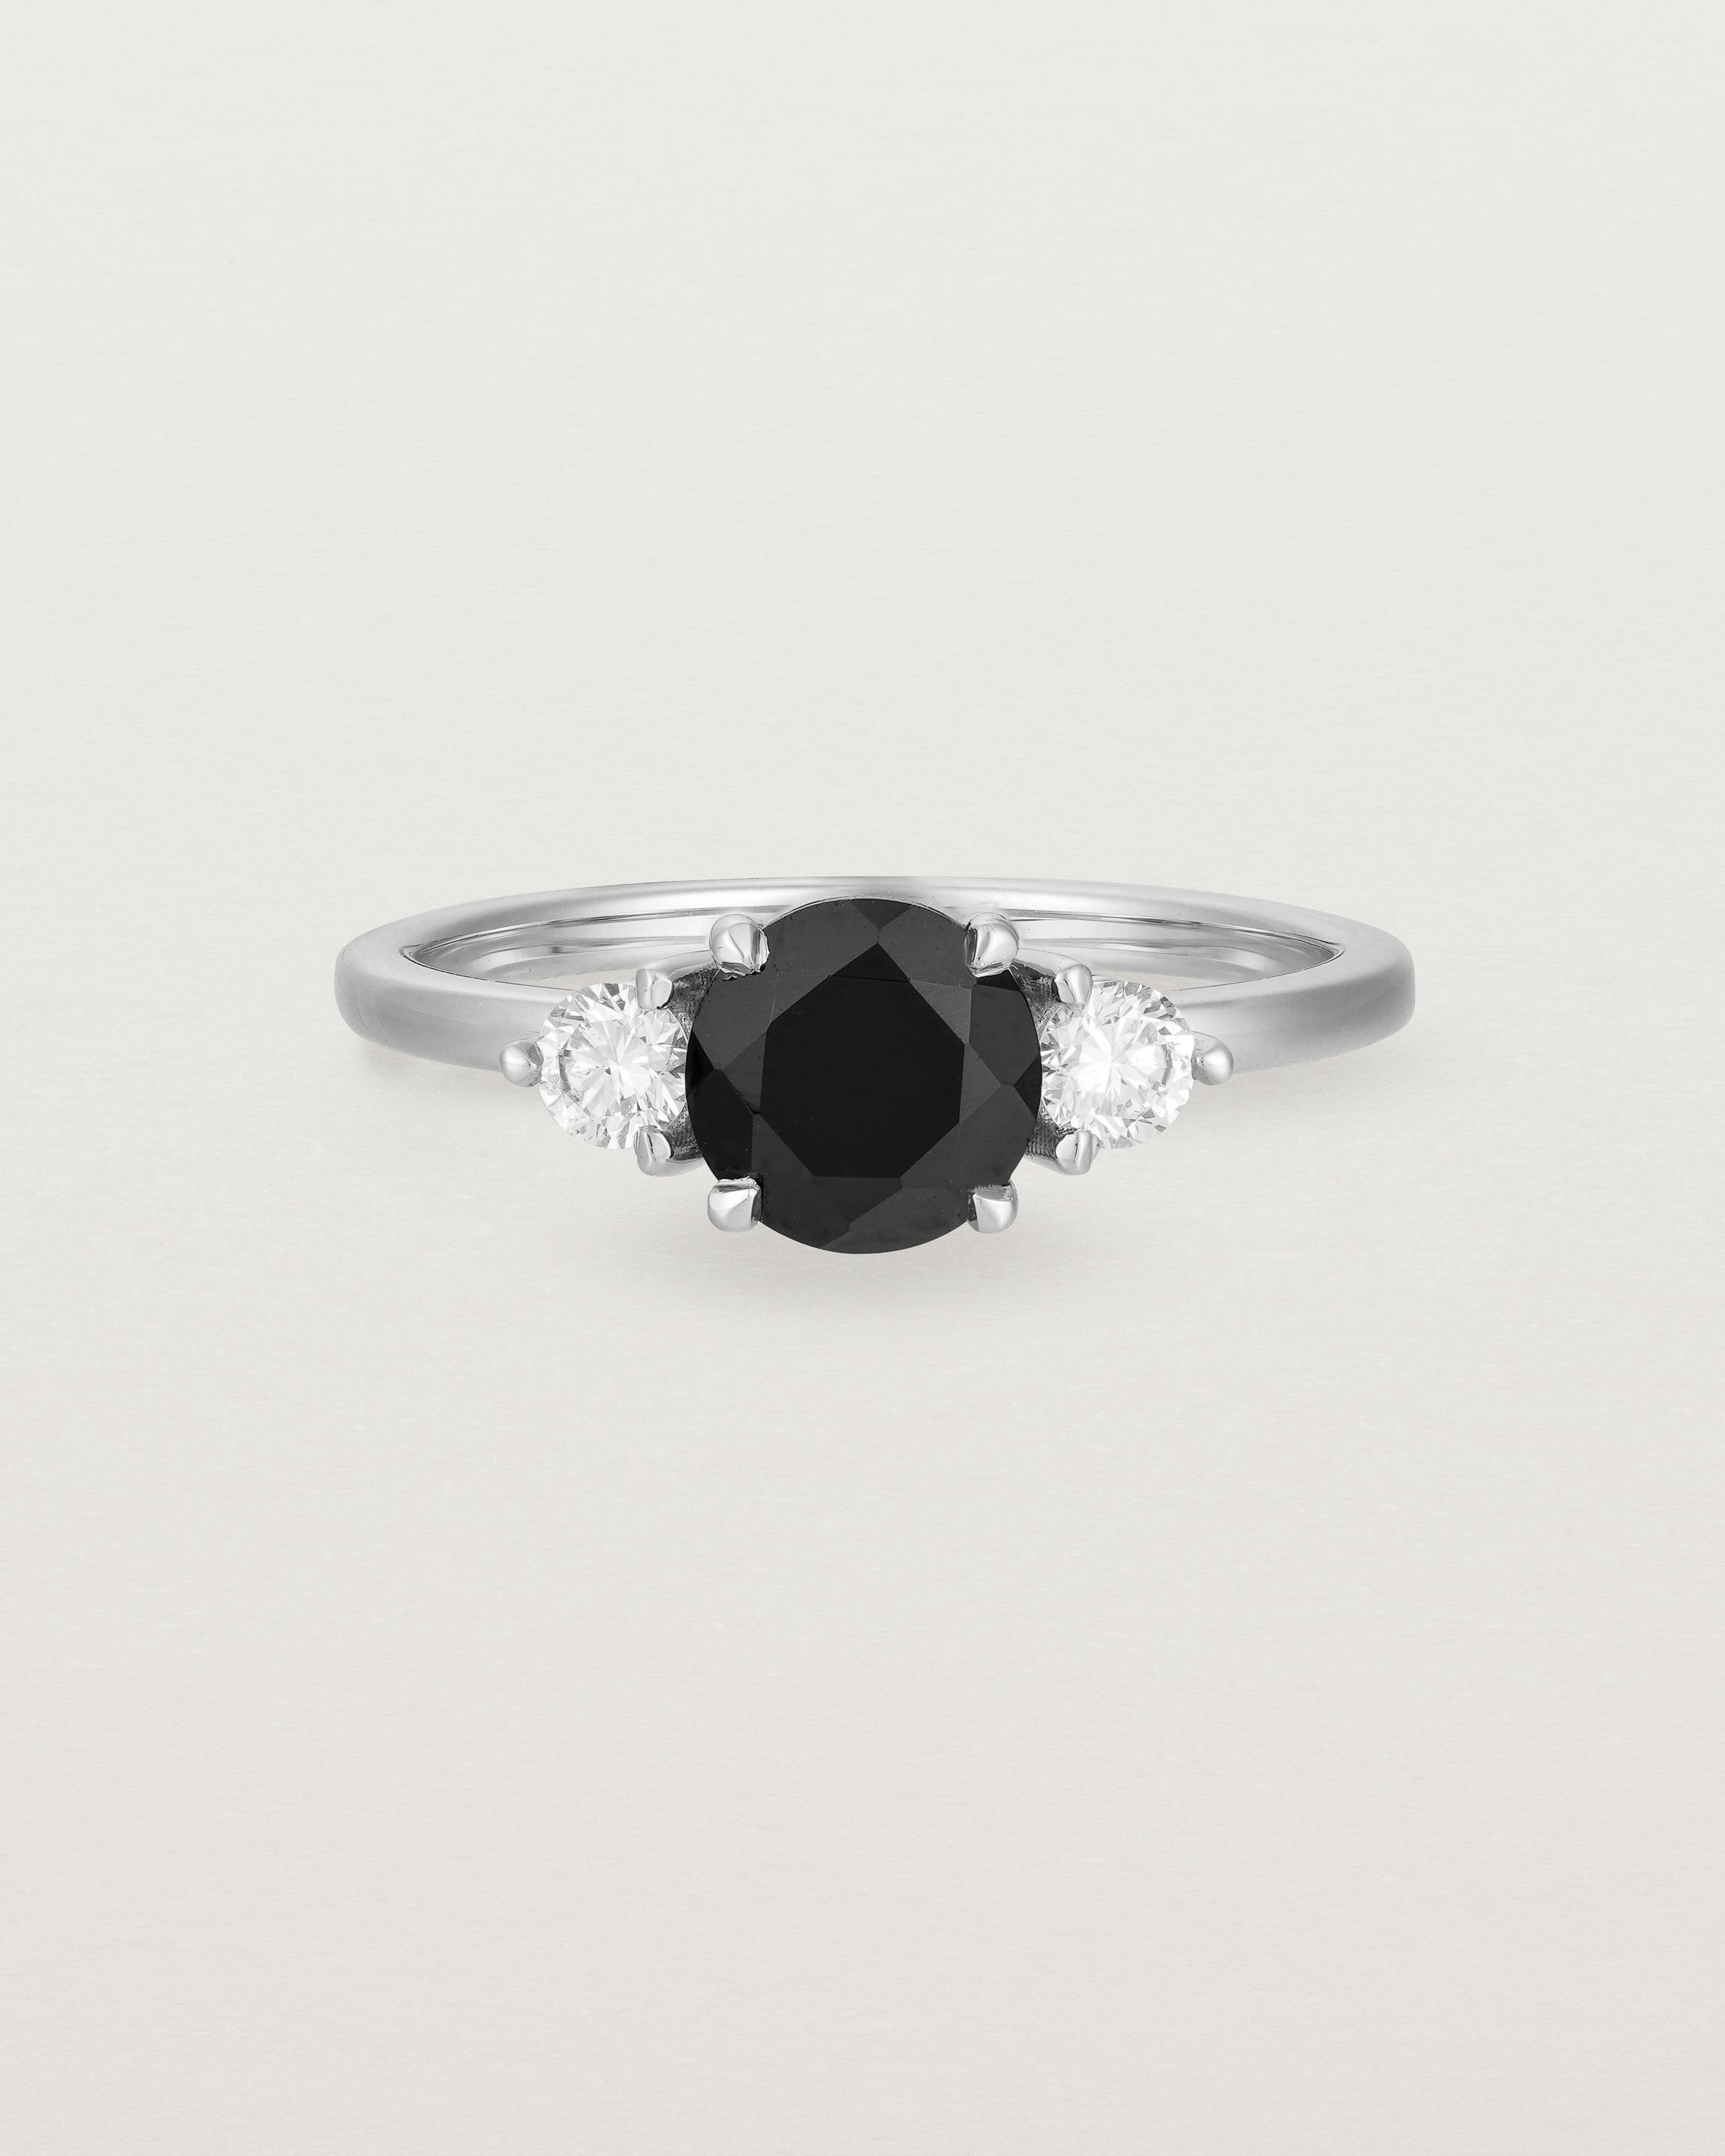 Front view of the Petite Una Round Trio Ring | Black Spinel & Diamonds | White Gold.